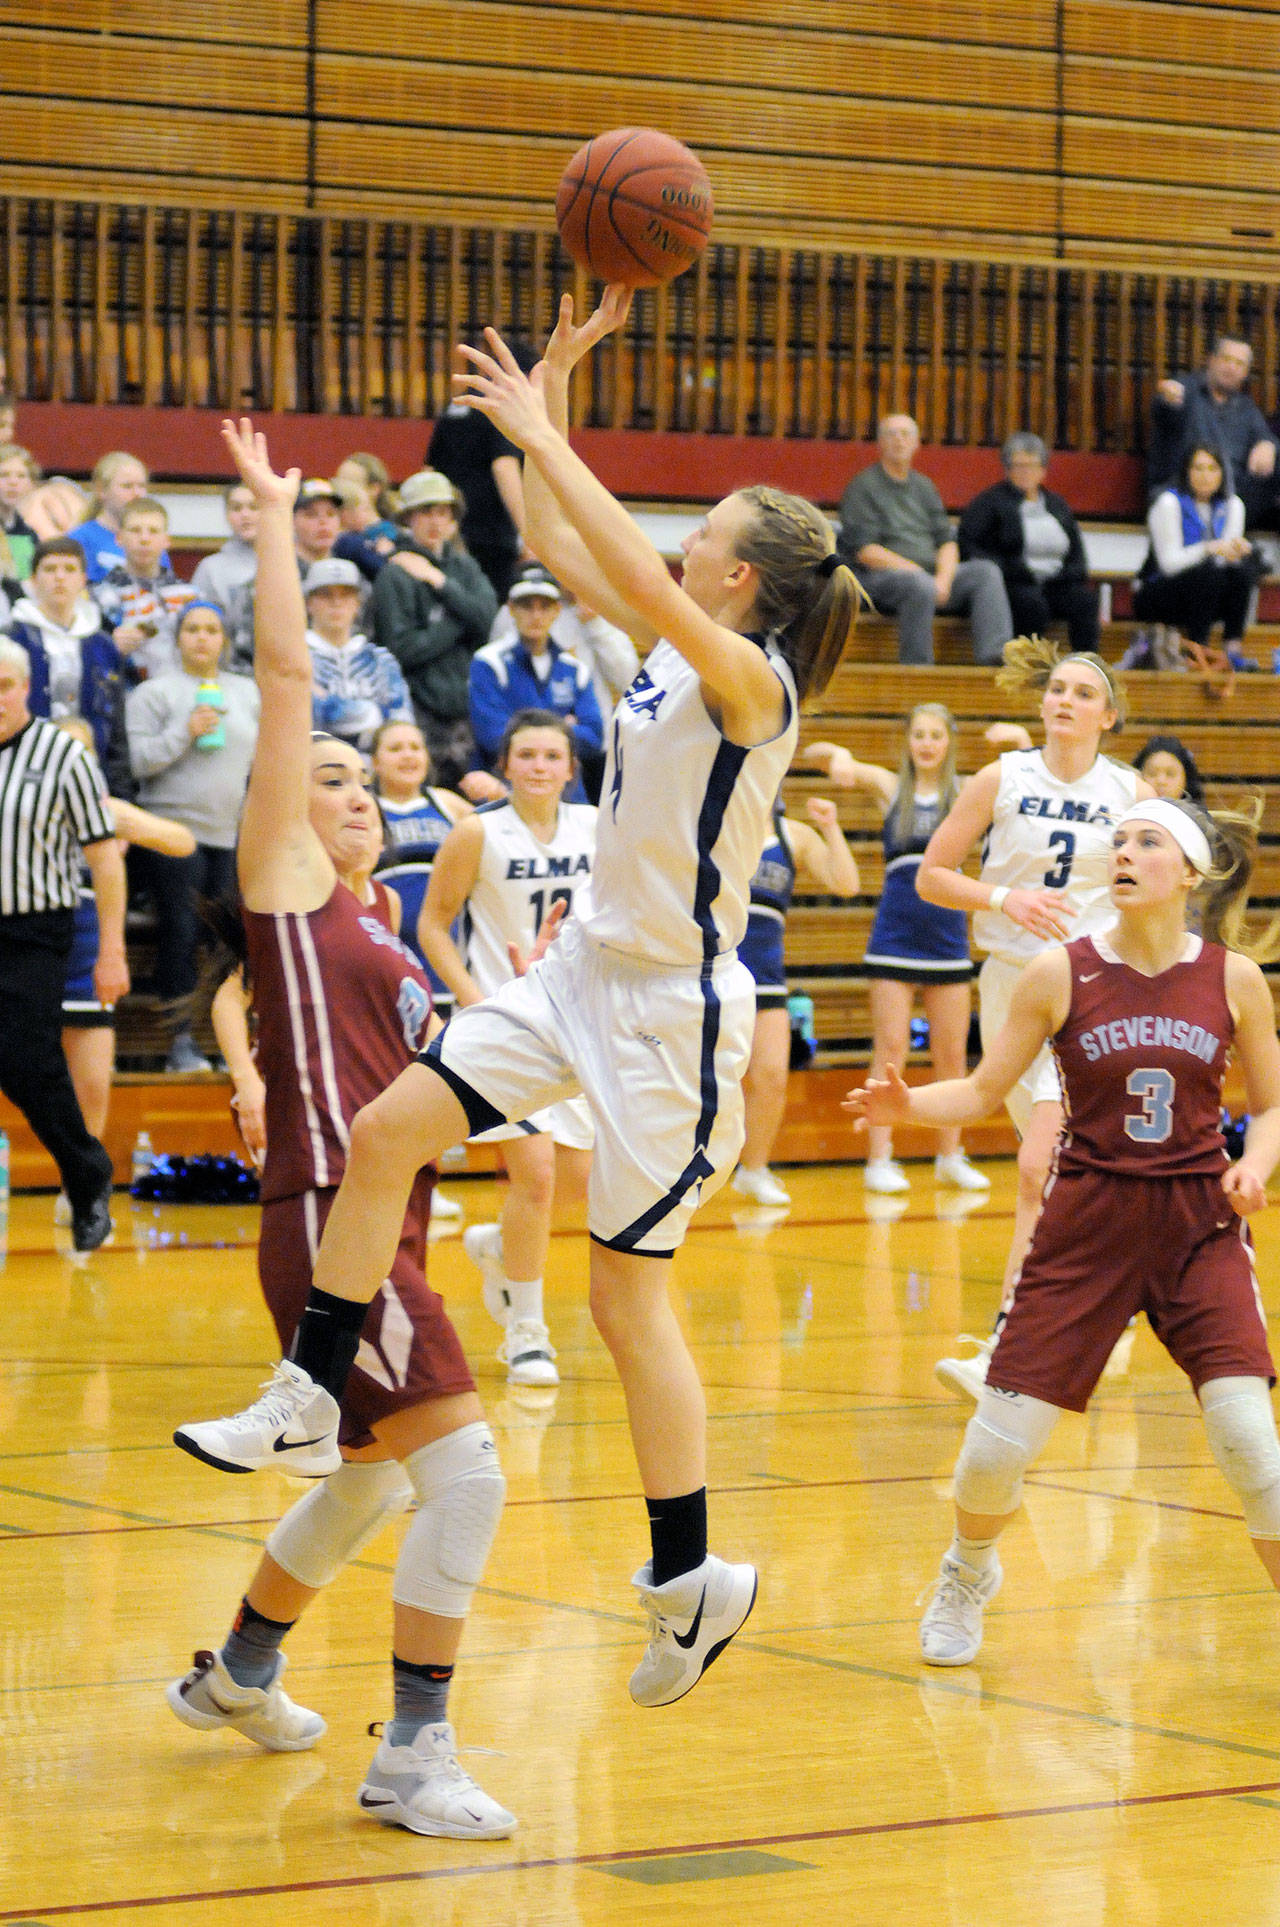 Elma’s Jillian Bieker floats through the lane during the second half of the Eagles’ 73-40 district-semifinal victory over Stevenson on Friday at Hoquiam High School. (Ryan Sparks | Grays Harbor News Group)